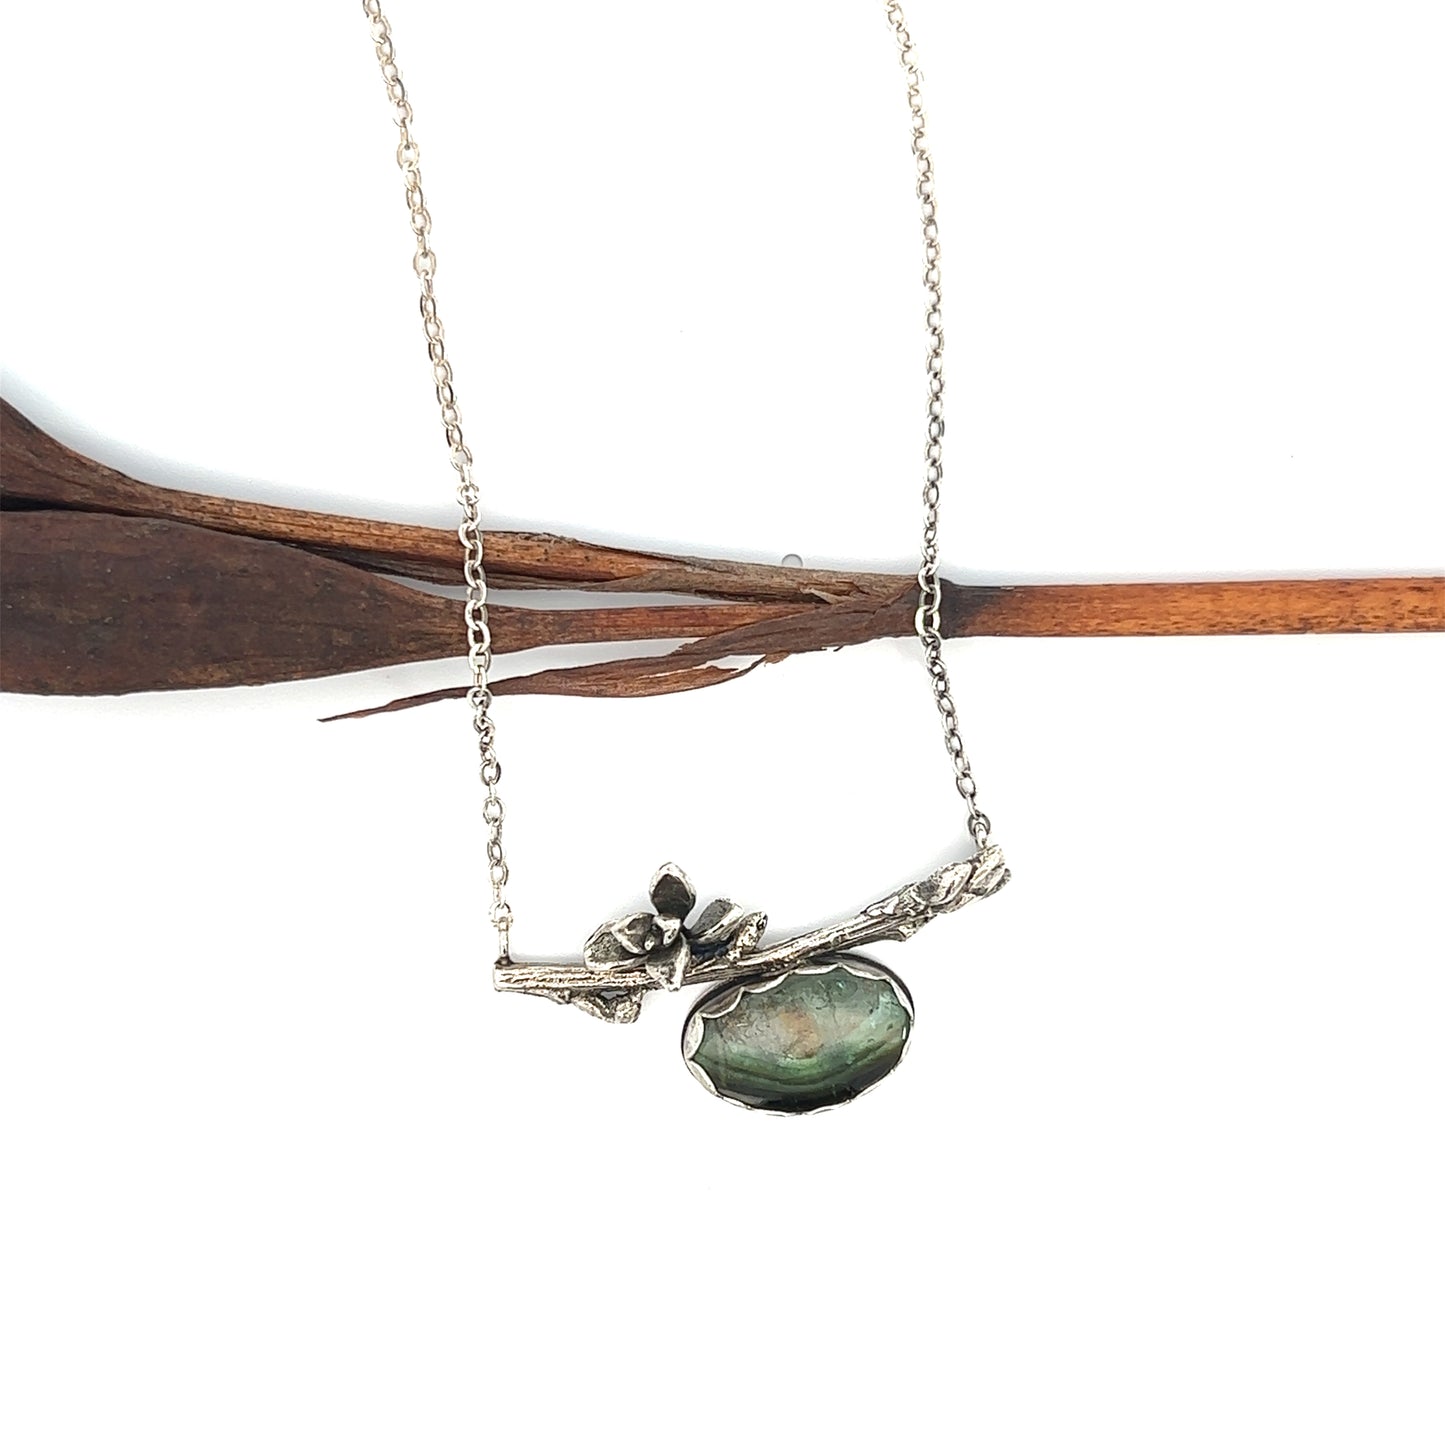 Silver Twig Bar Necklace with Tourmaline